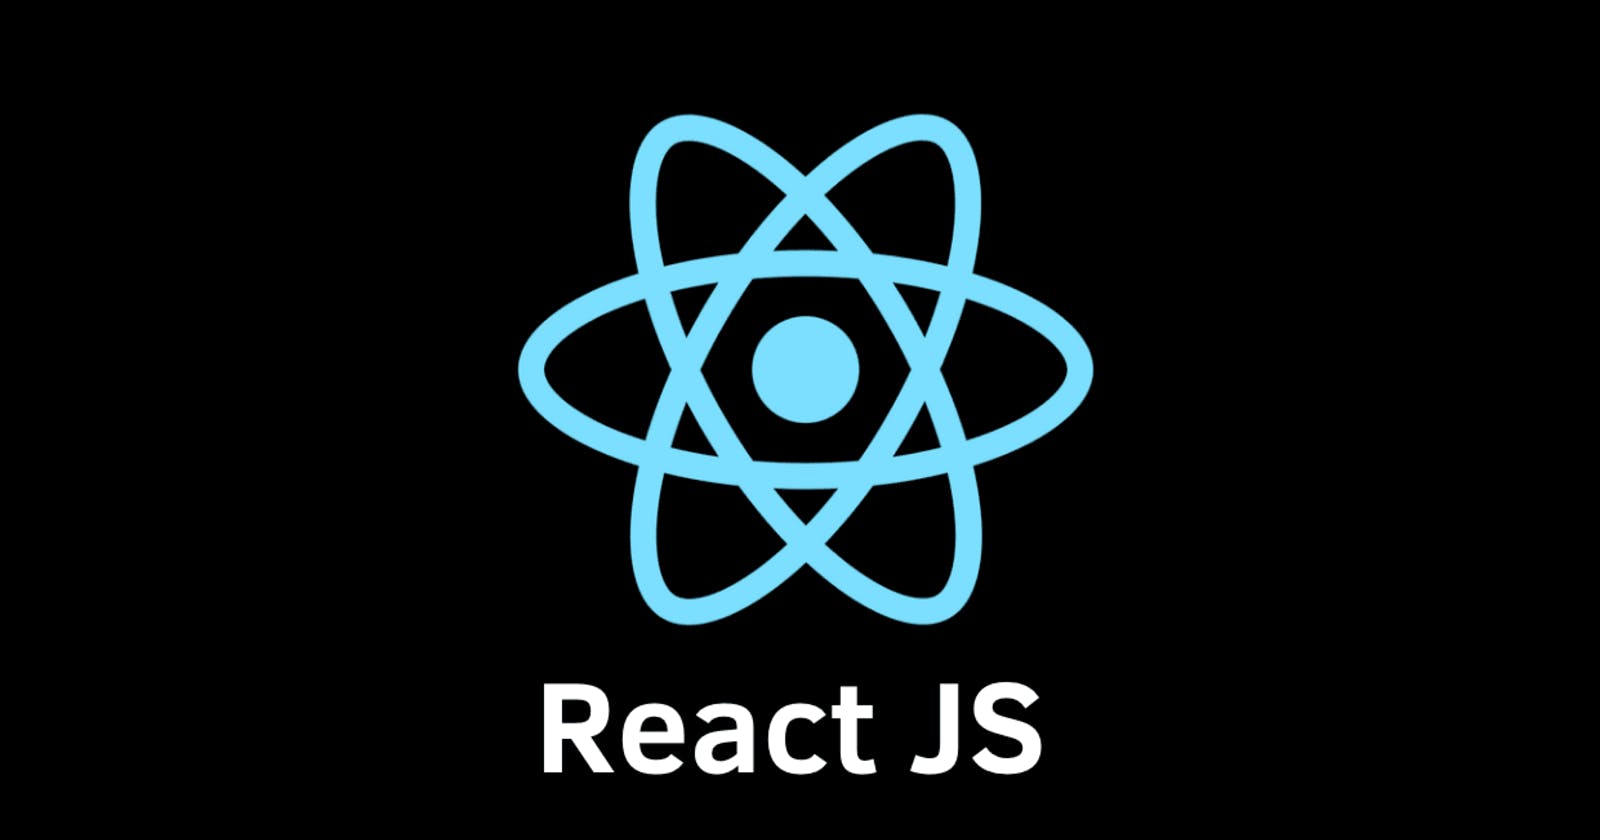 Day 9 - What is ref in react?